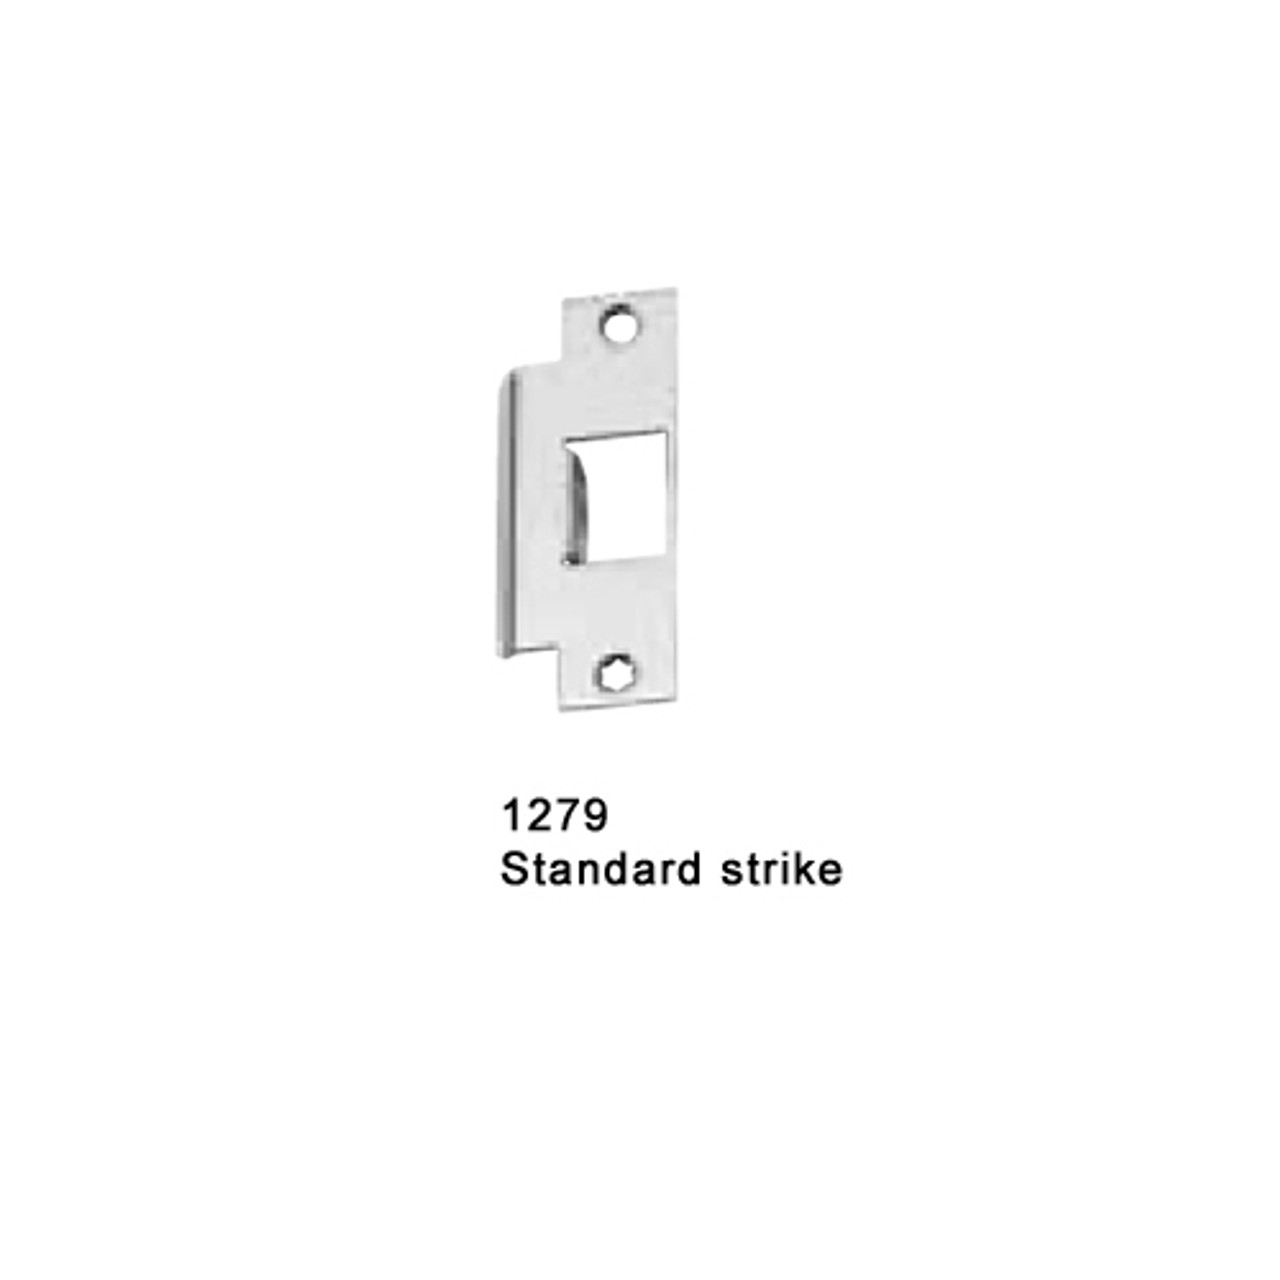 F-25-M-TP-US26D-4-LHR Falcon 25 Series Fire Rated Mortise Lock Devices with 512TP Thumbpiece Trim in Satin Chrome